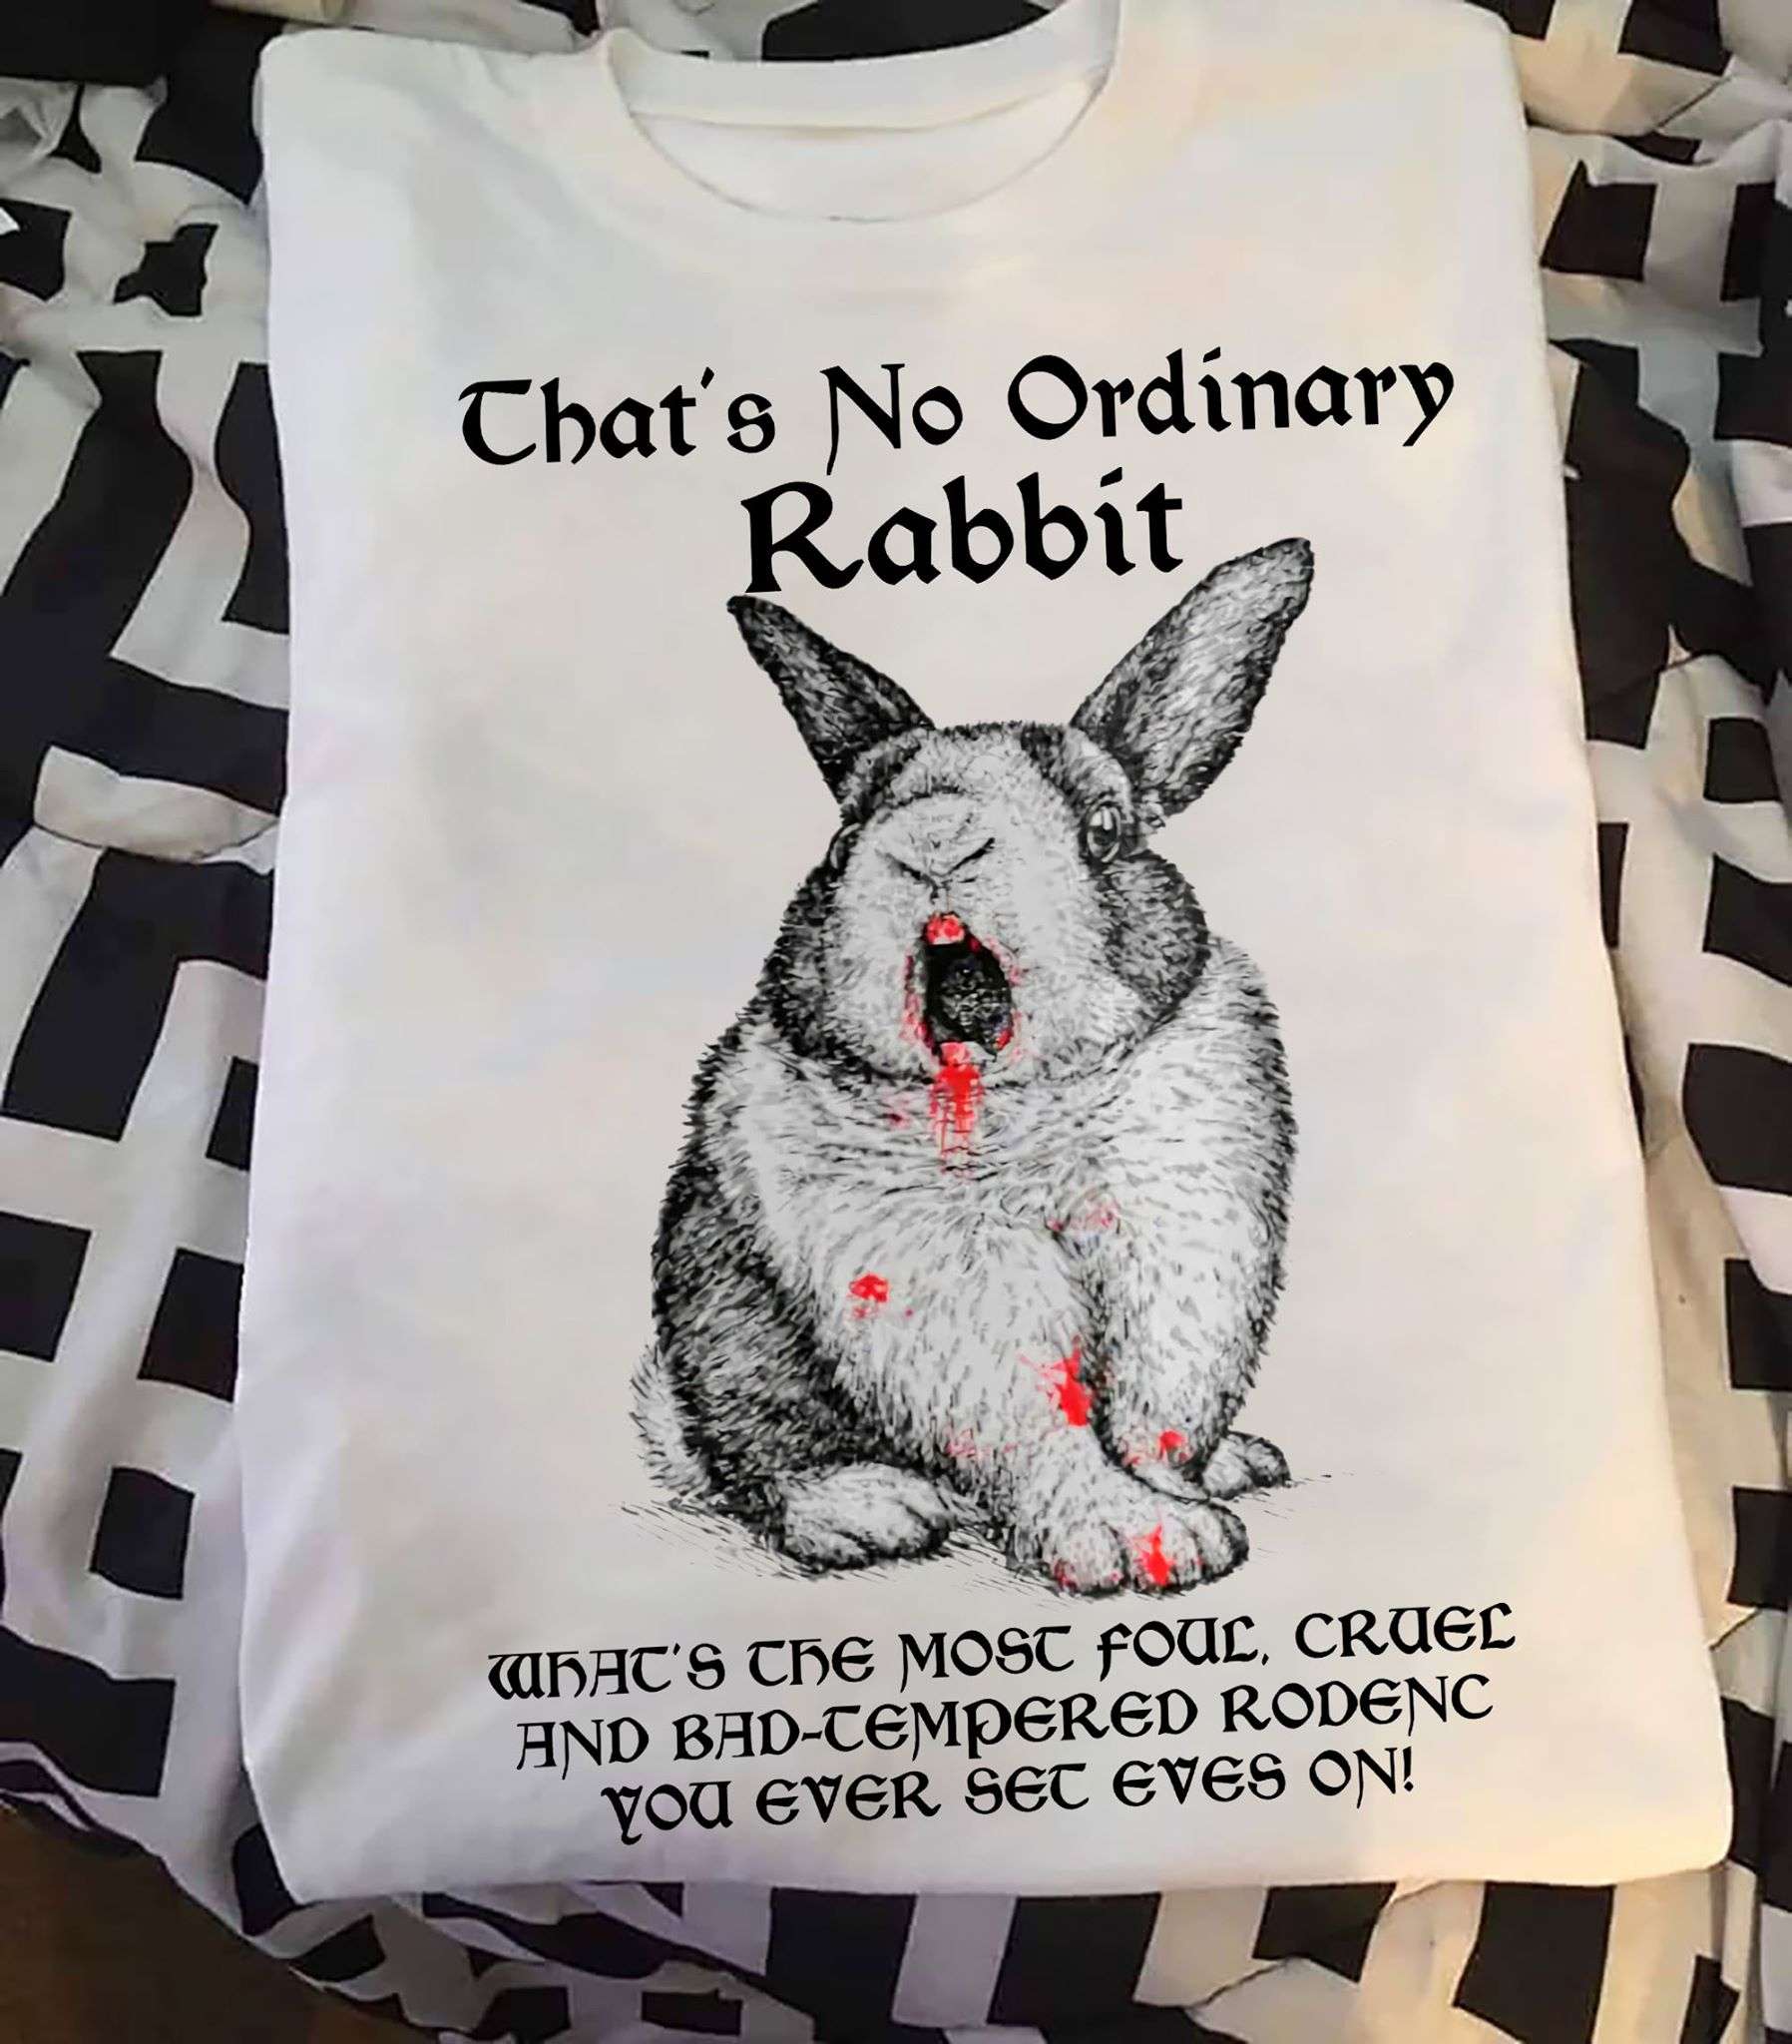 Bad Rabbit - that's no ordinary rabbit what's the most fol, cruel and bad tempered